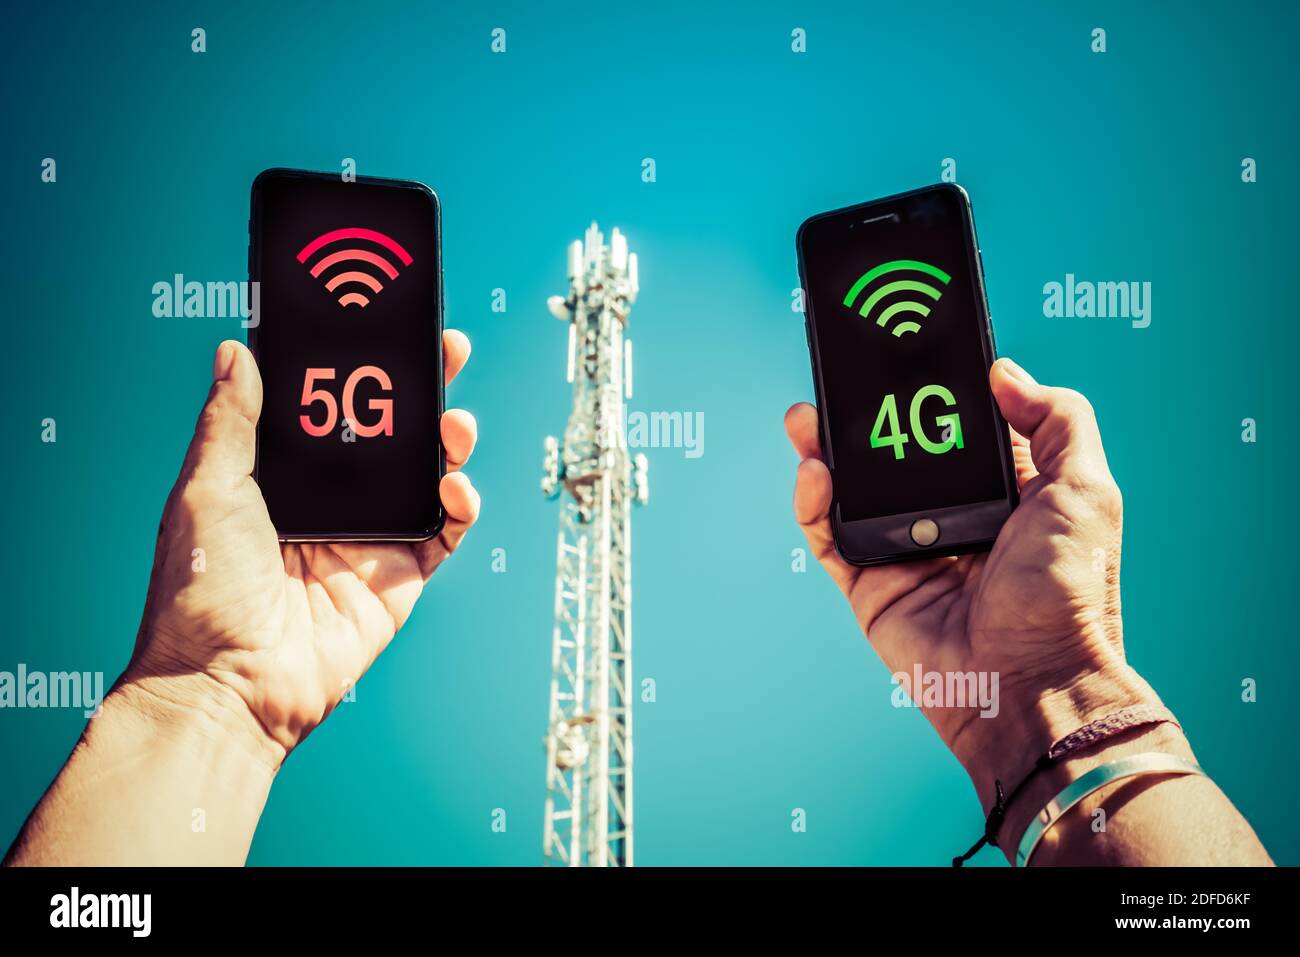 Cellular telephony relay antenna and comparison between 4G and 5G networks. Stock Photo